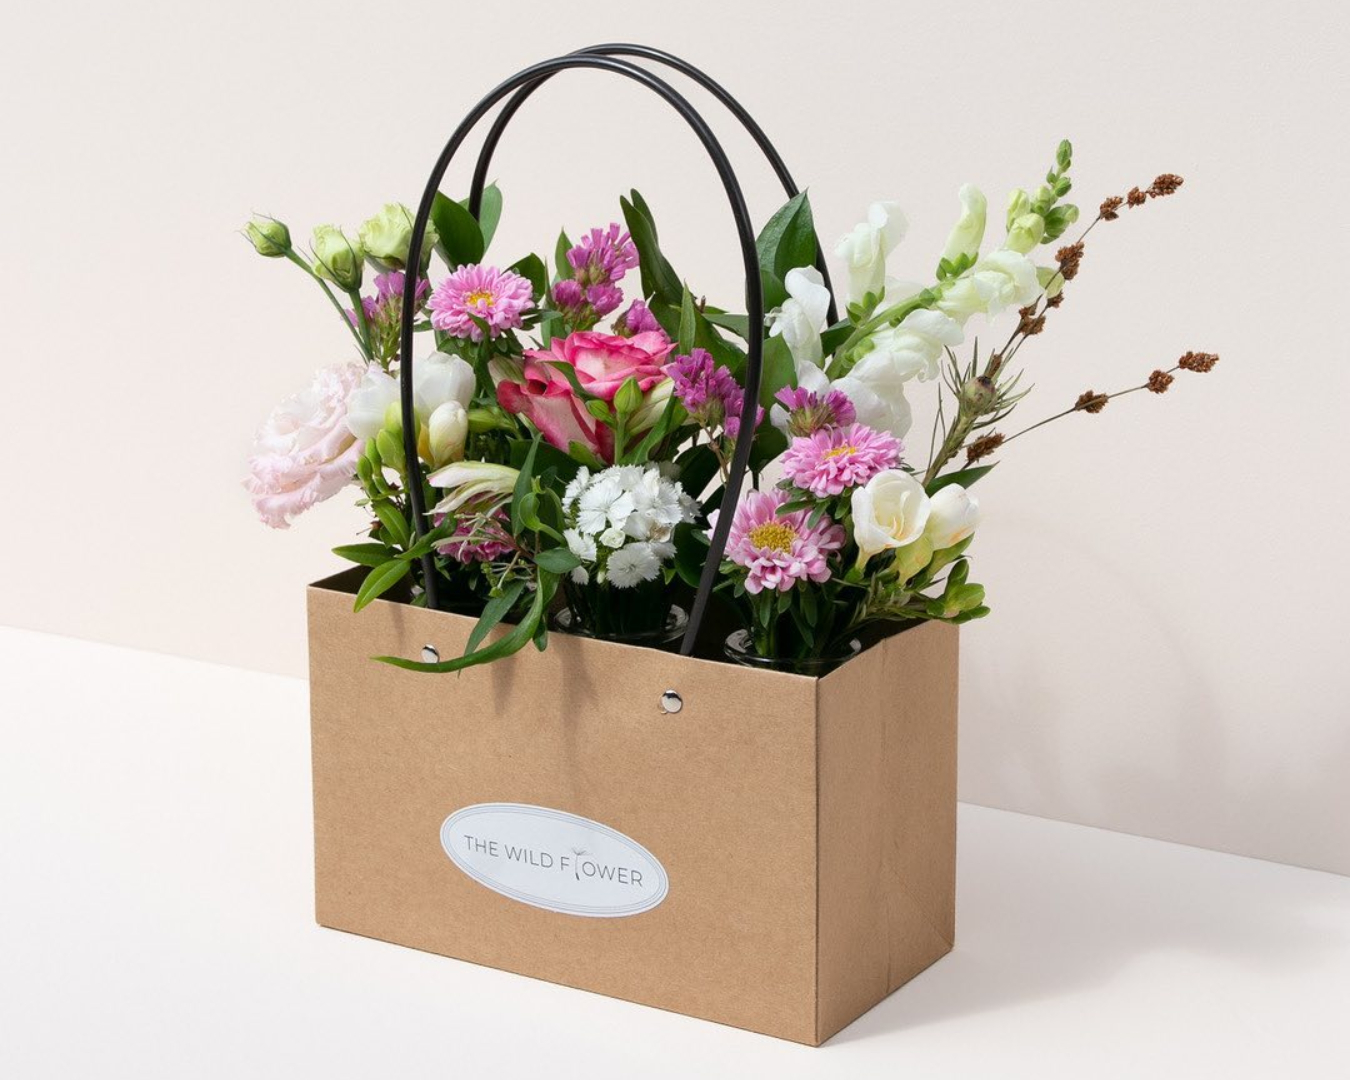 A pretty bunch from The Wild Flower is displayed in their chic paper box packaging